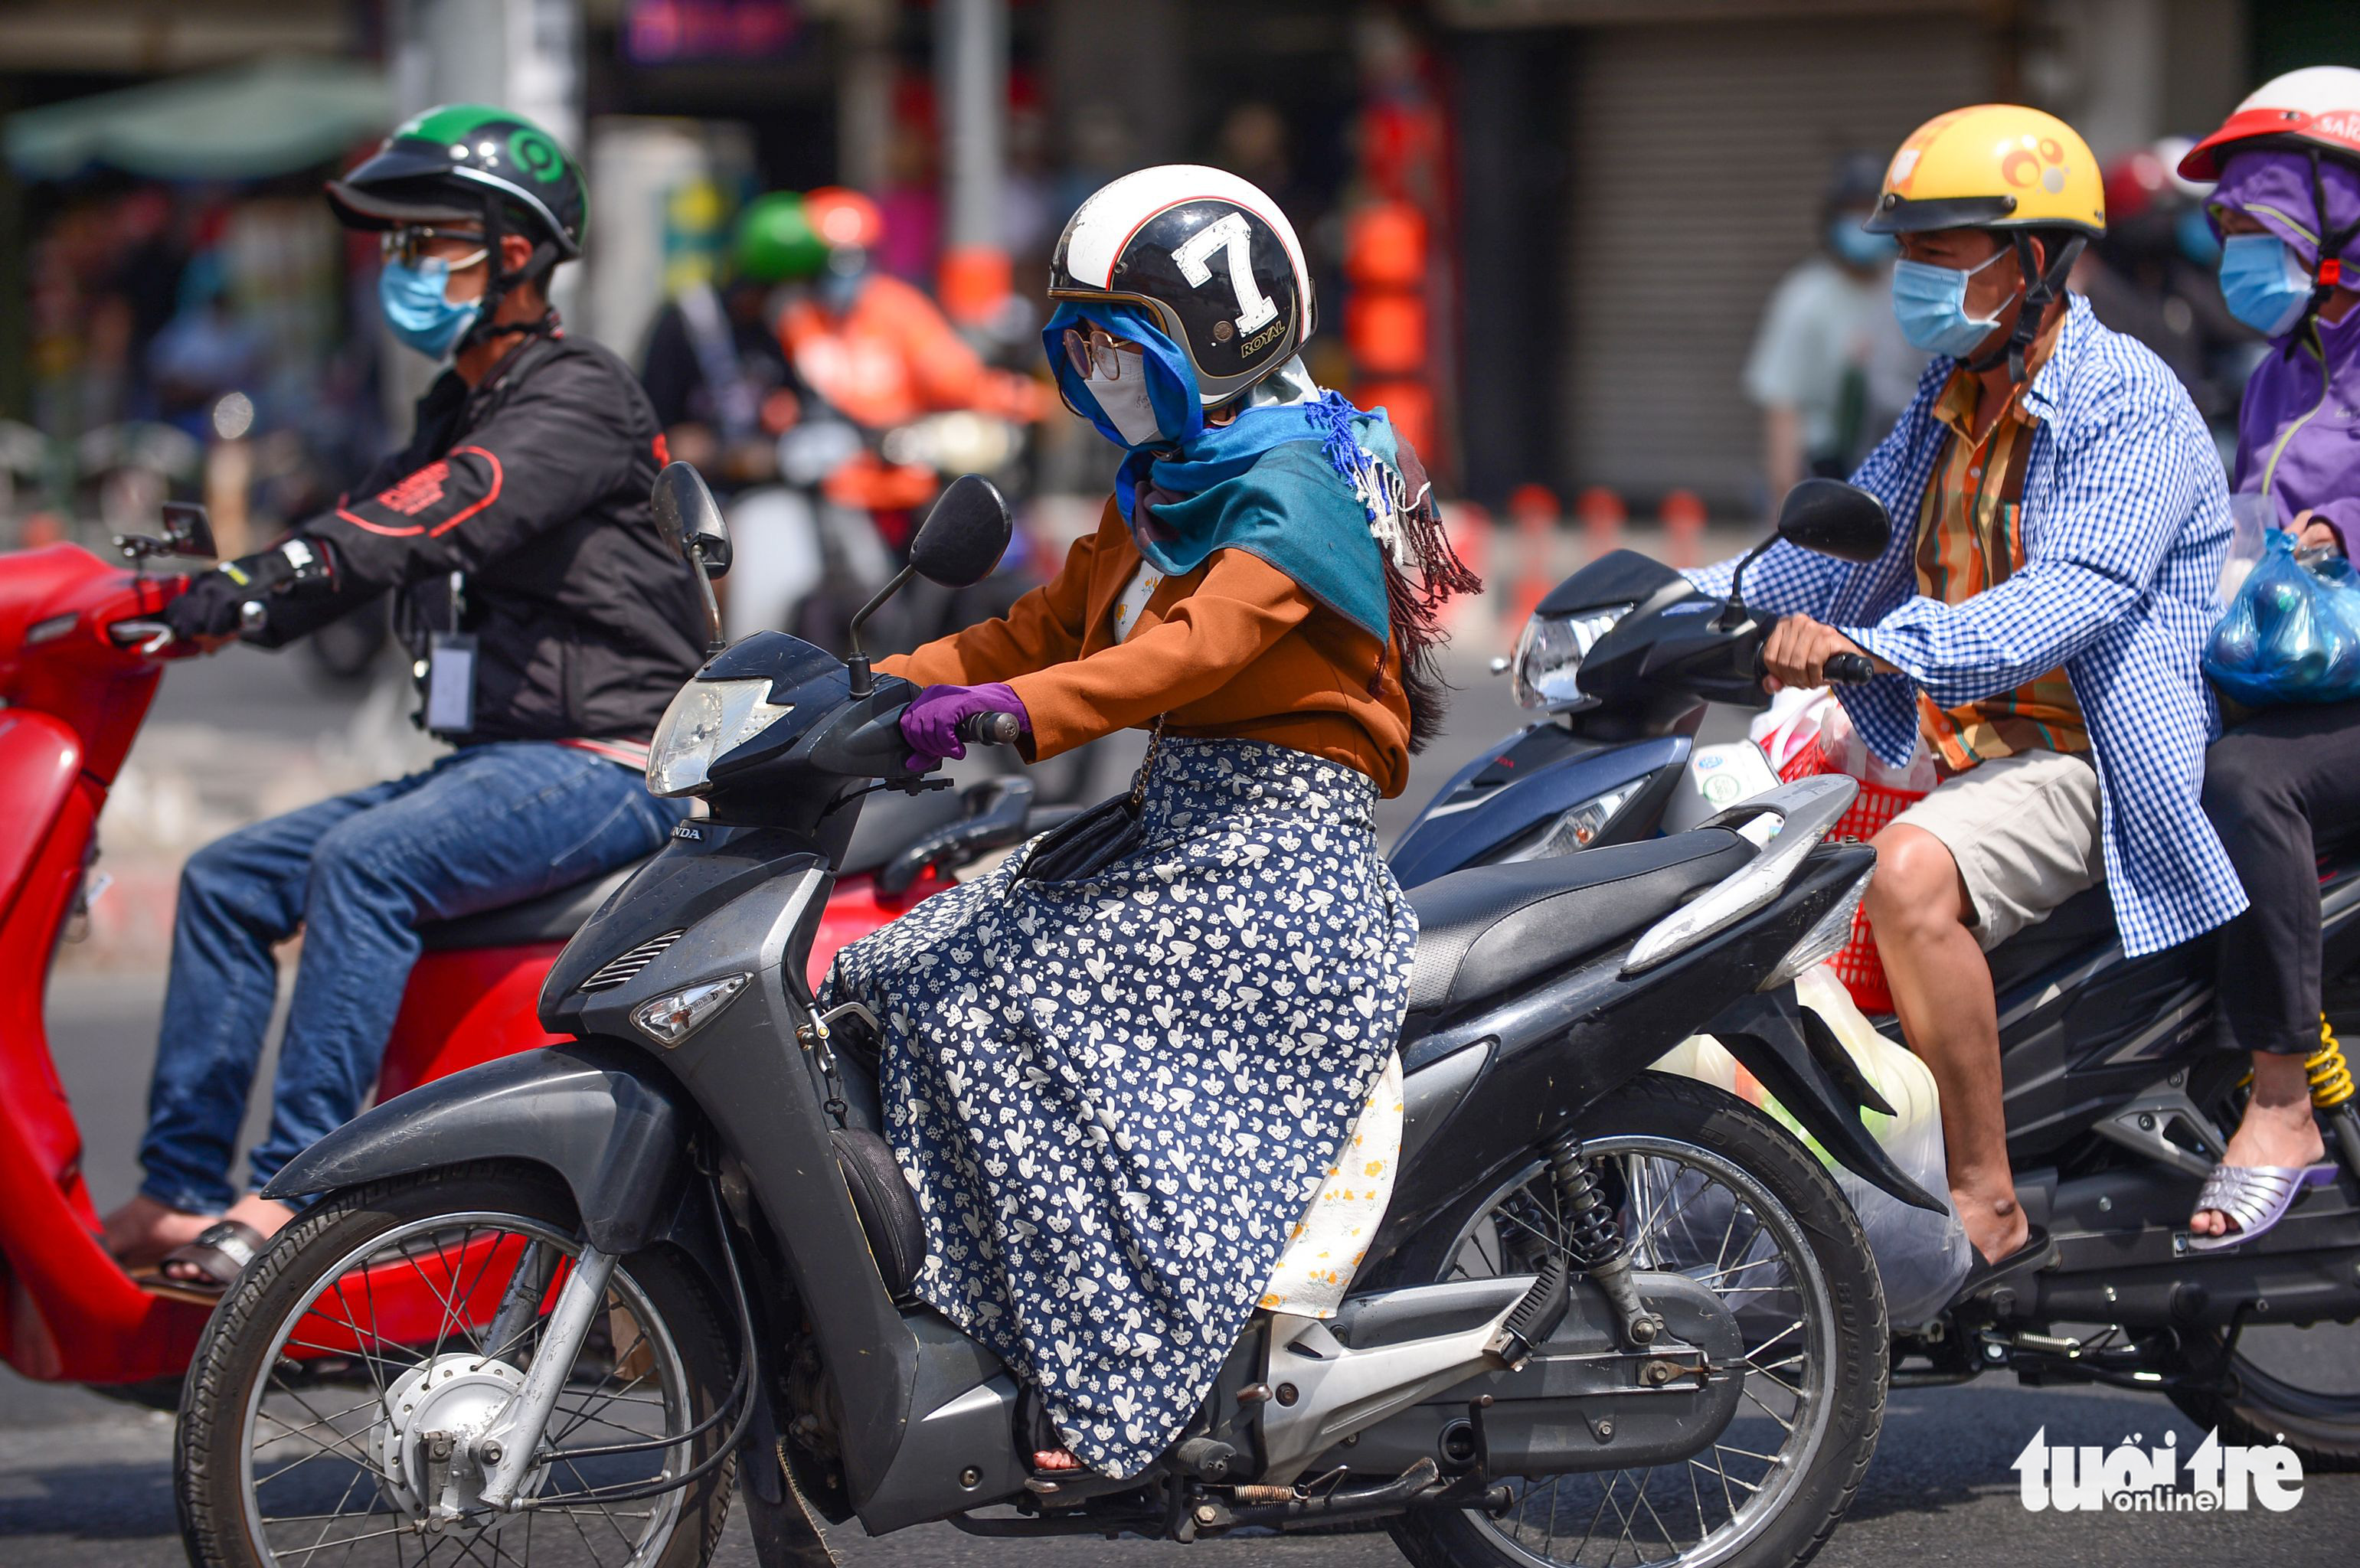 A woman covering her face and body rides a motorbike on a street in Ho Chi Minh City. Photo: Quang Dinh / Tuoi Tre